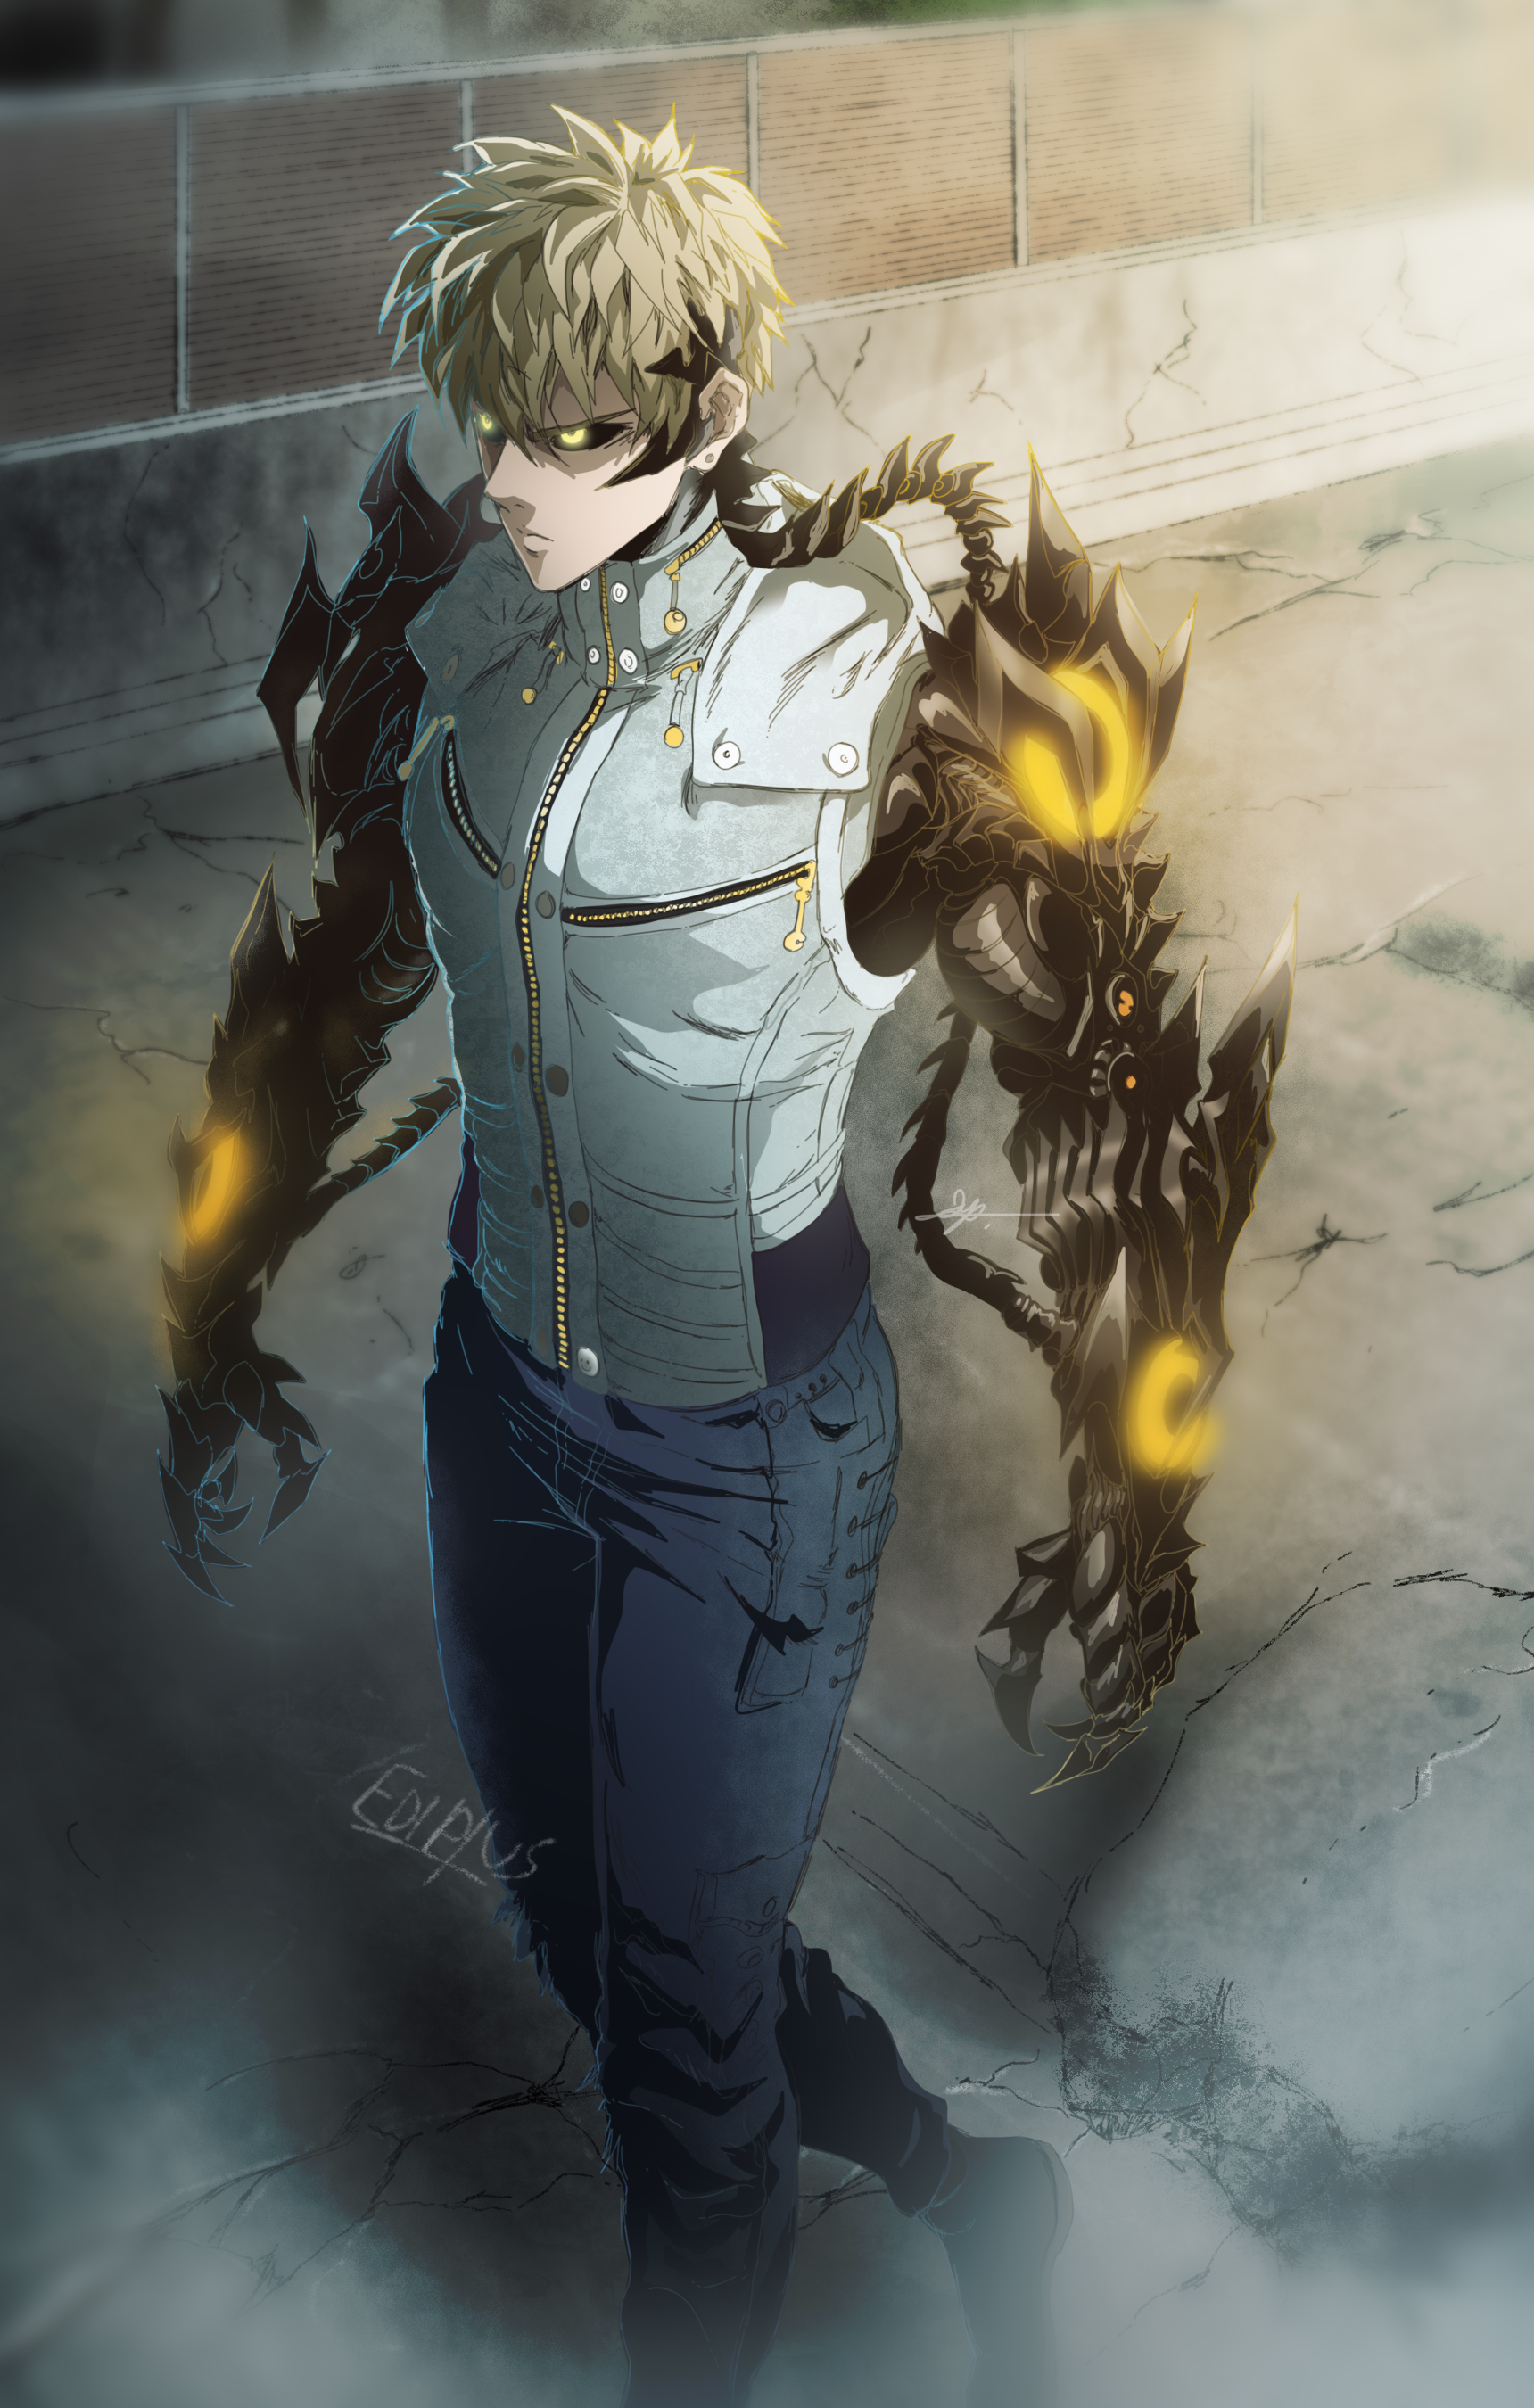 1720x2700 Genos One Punch Man 93 by EDIPTUS on | One punch man anime, Saitama one punch man, Saitama one punch